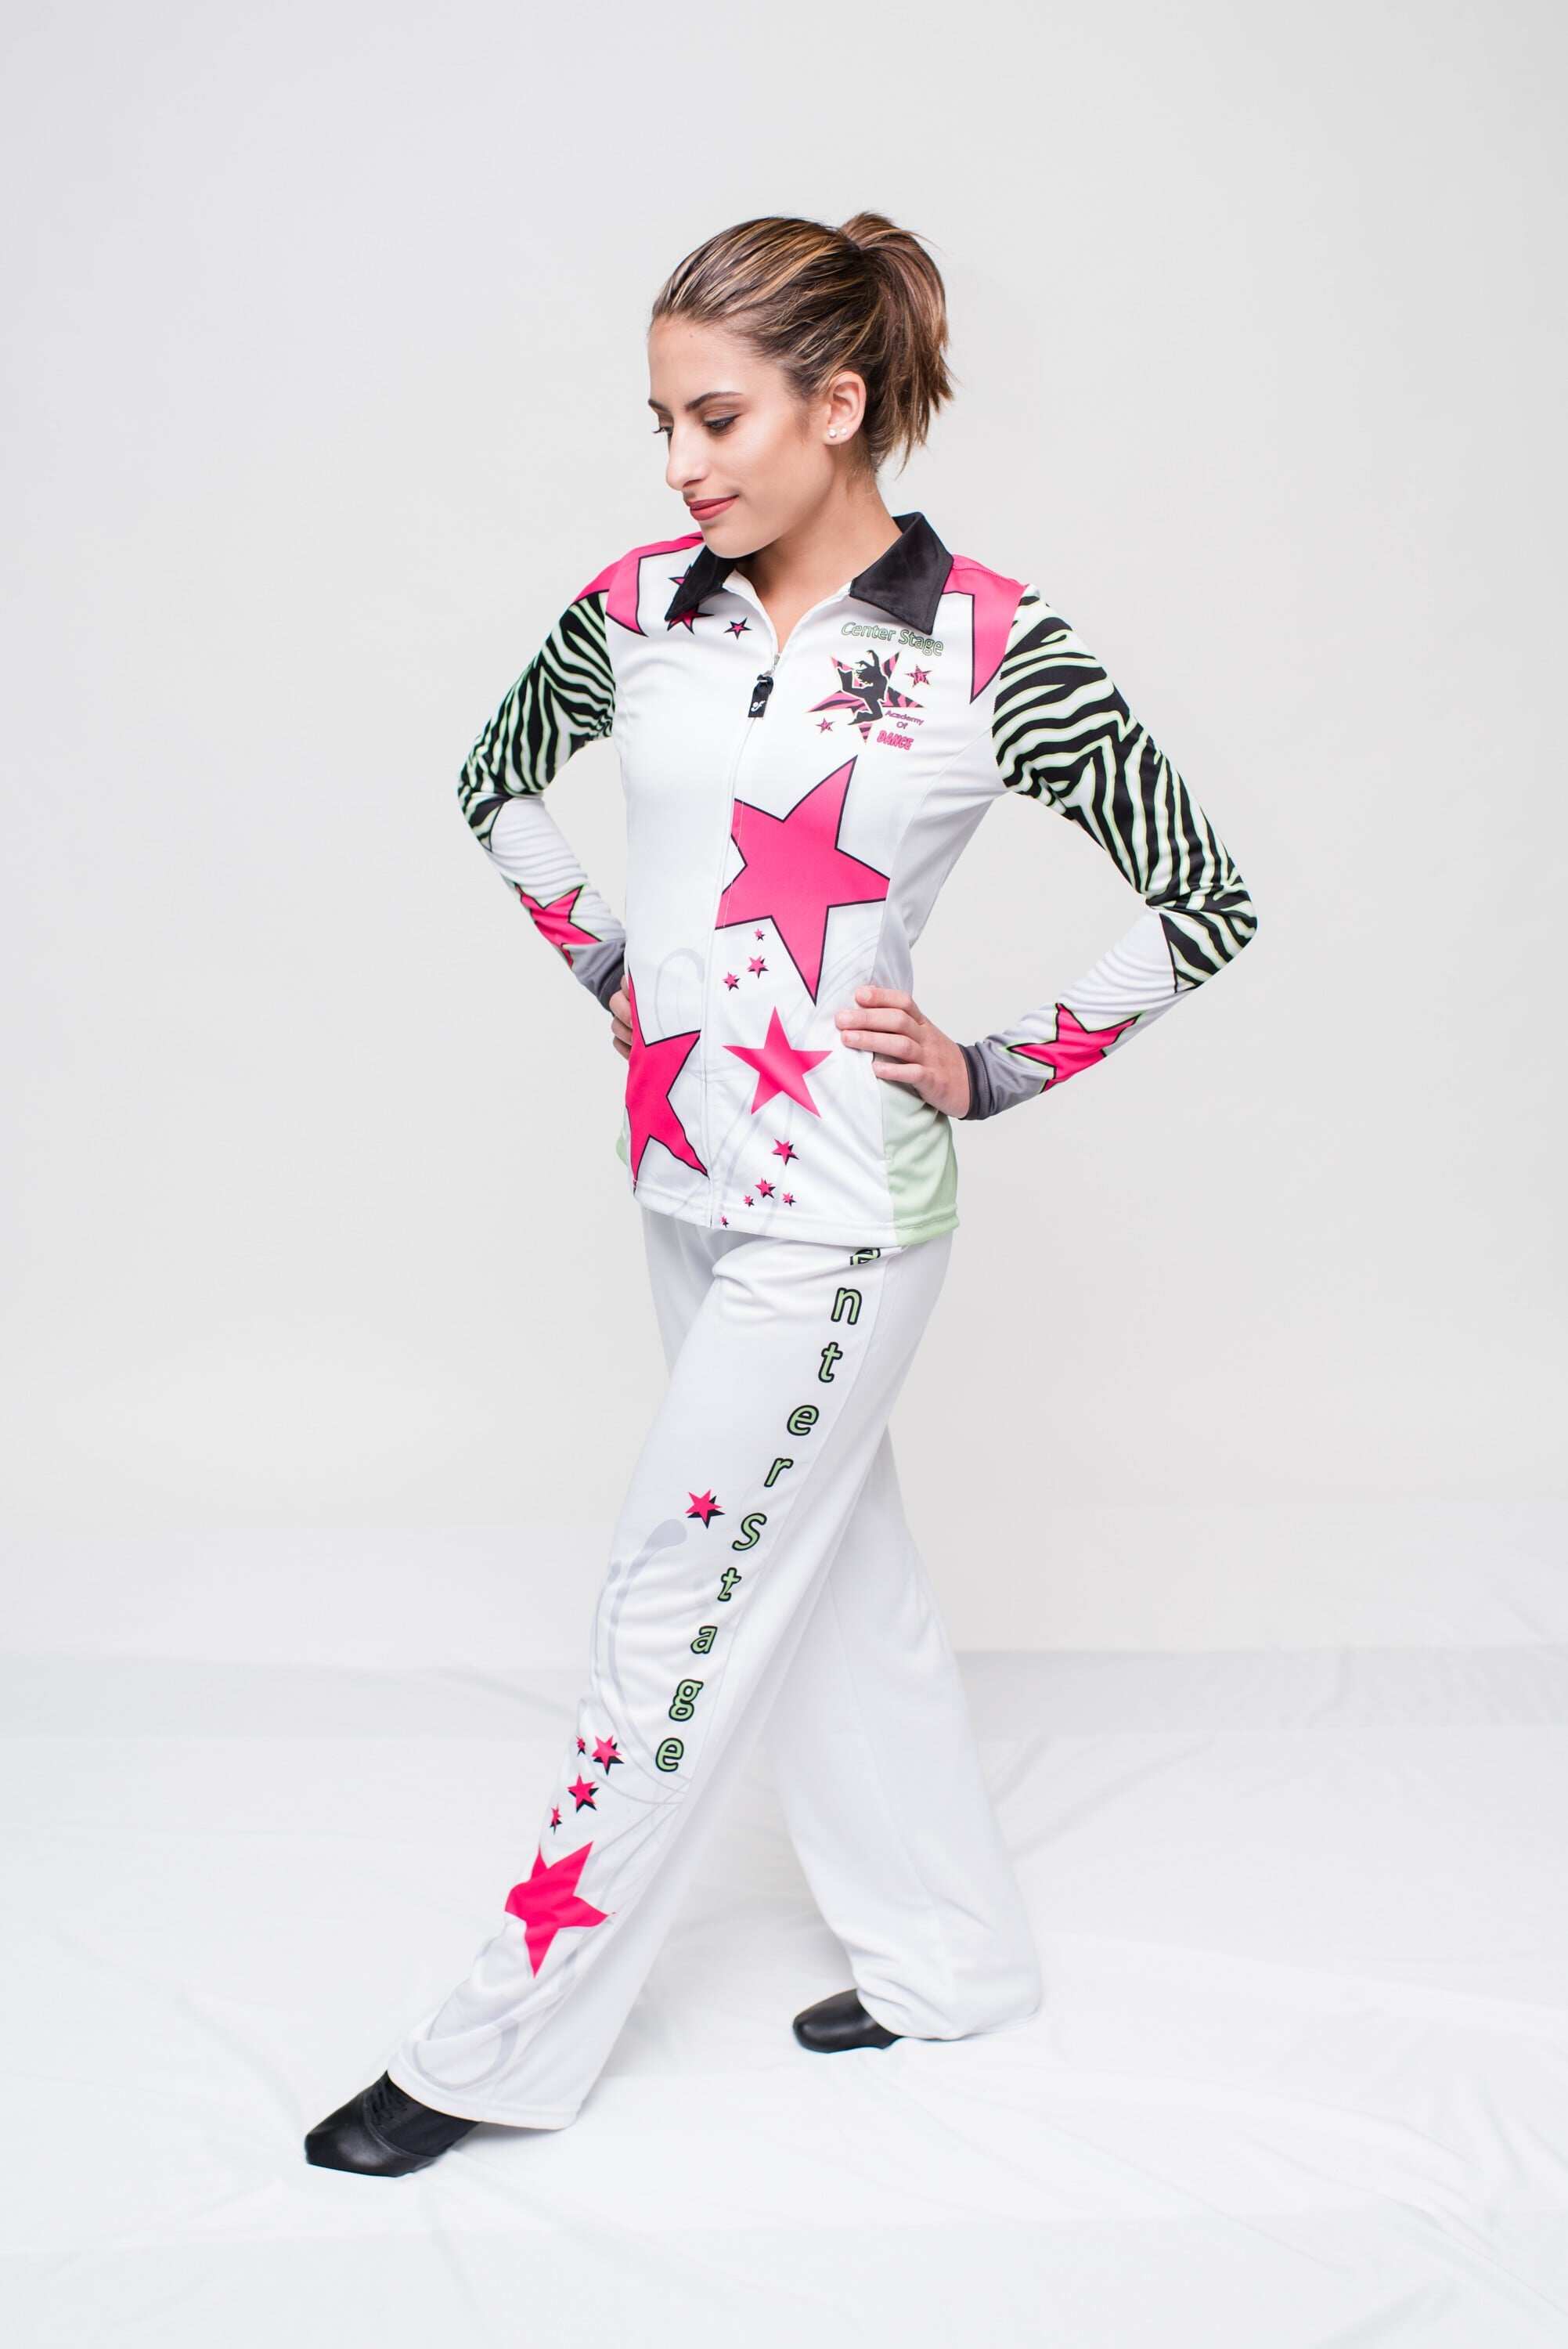 Be a standout at Dance Competiton with this All White Warrm-up with a strong visual design on jacket, sublimation at its finest